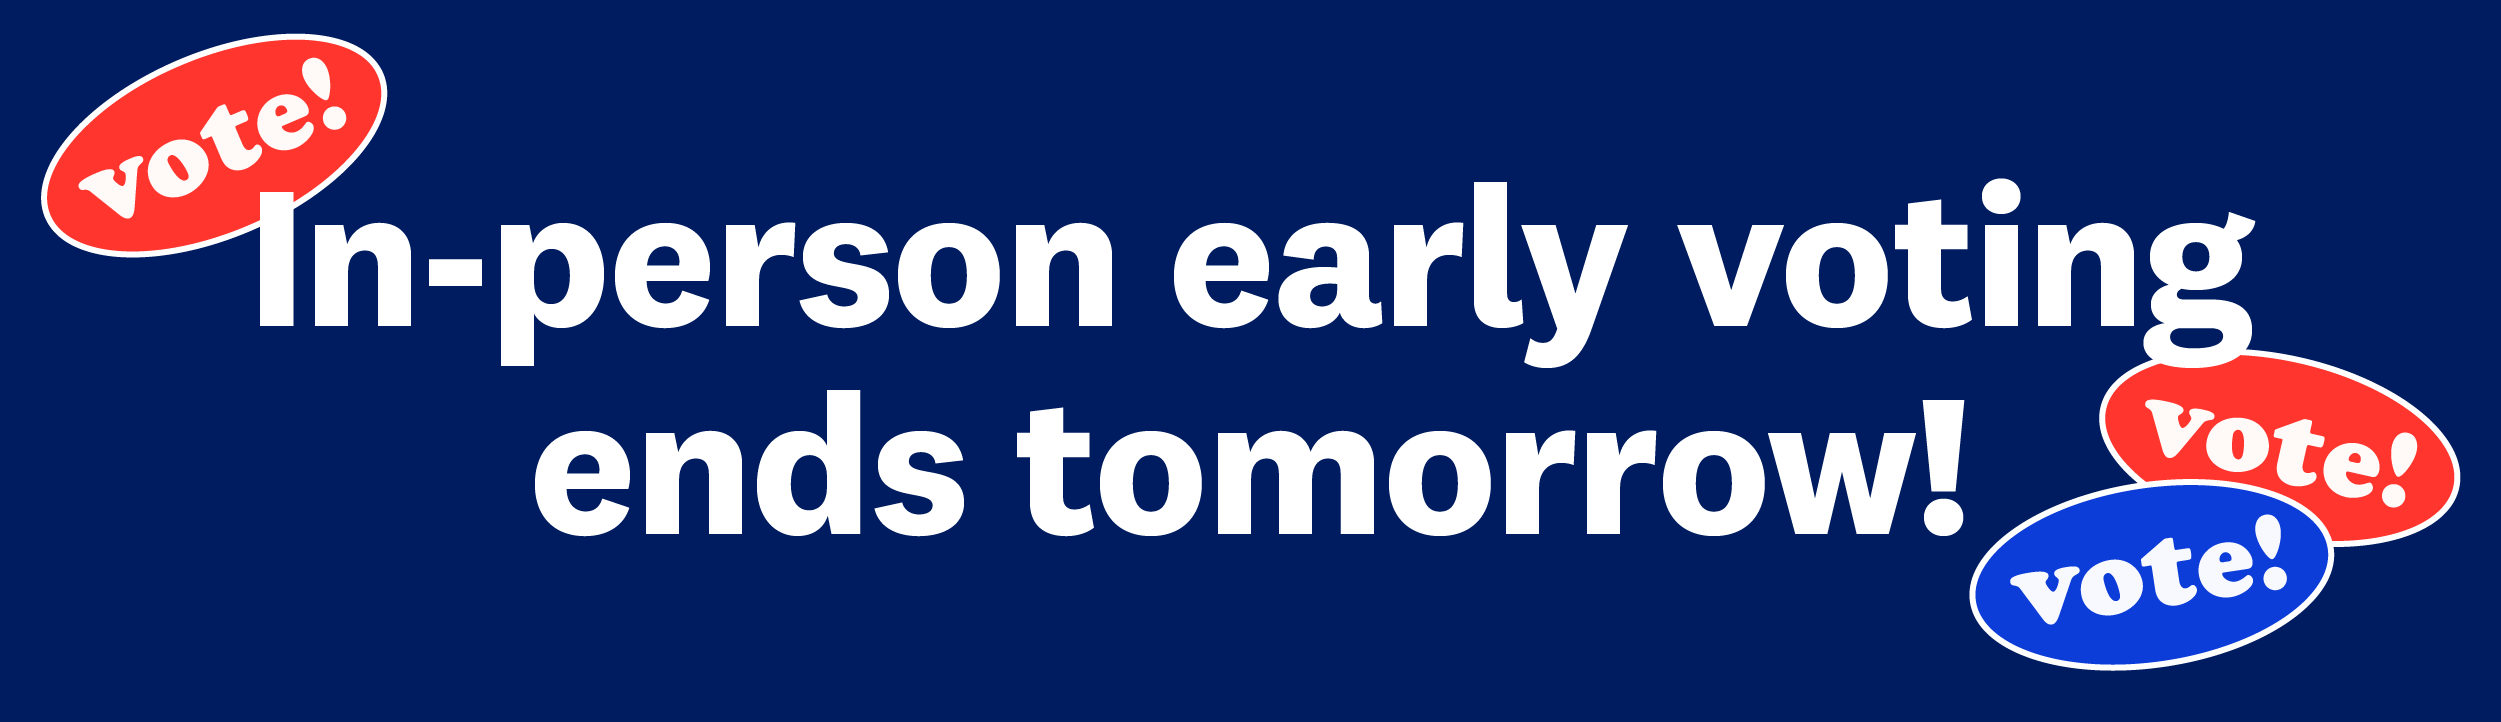 In-person early voting ends tomorrow!